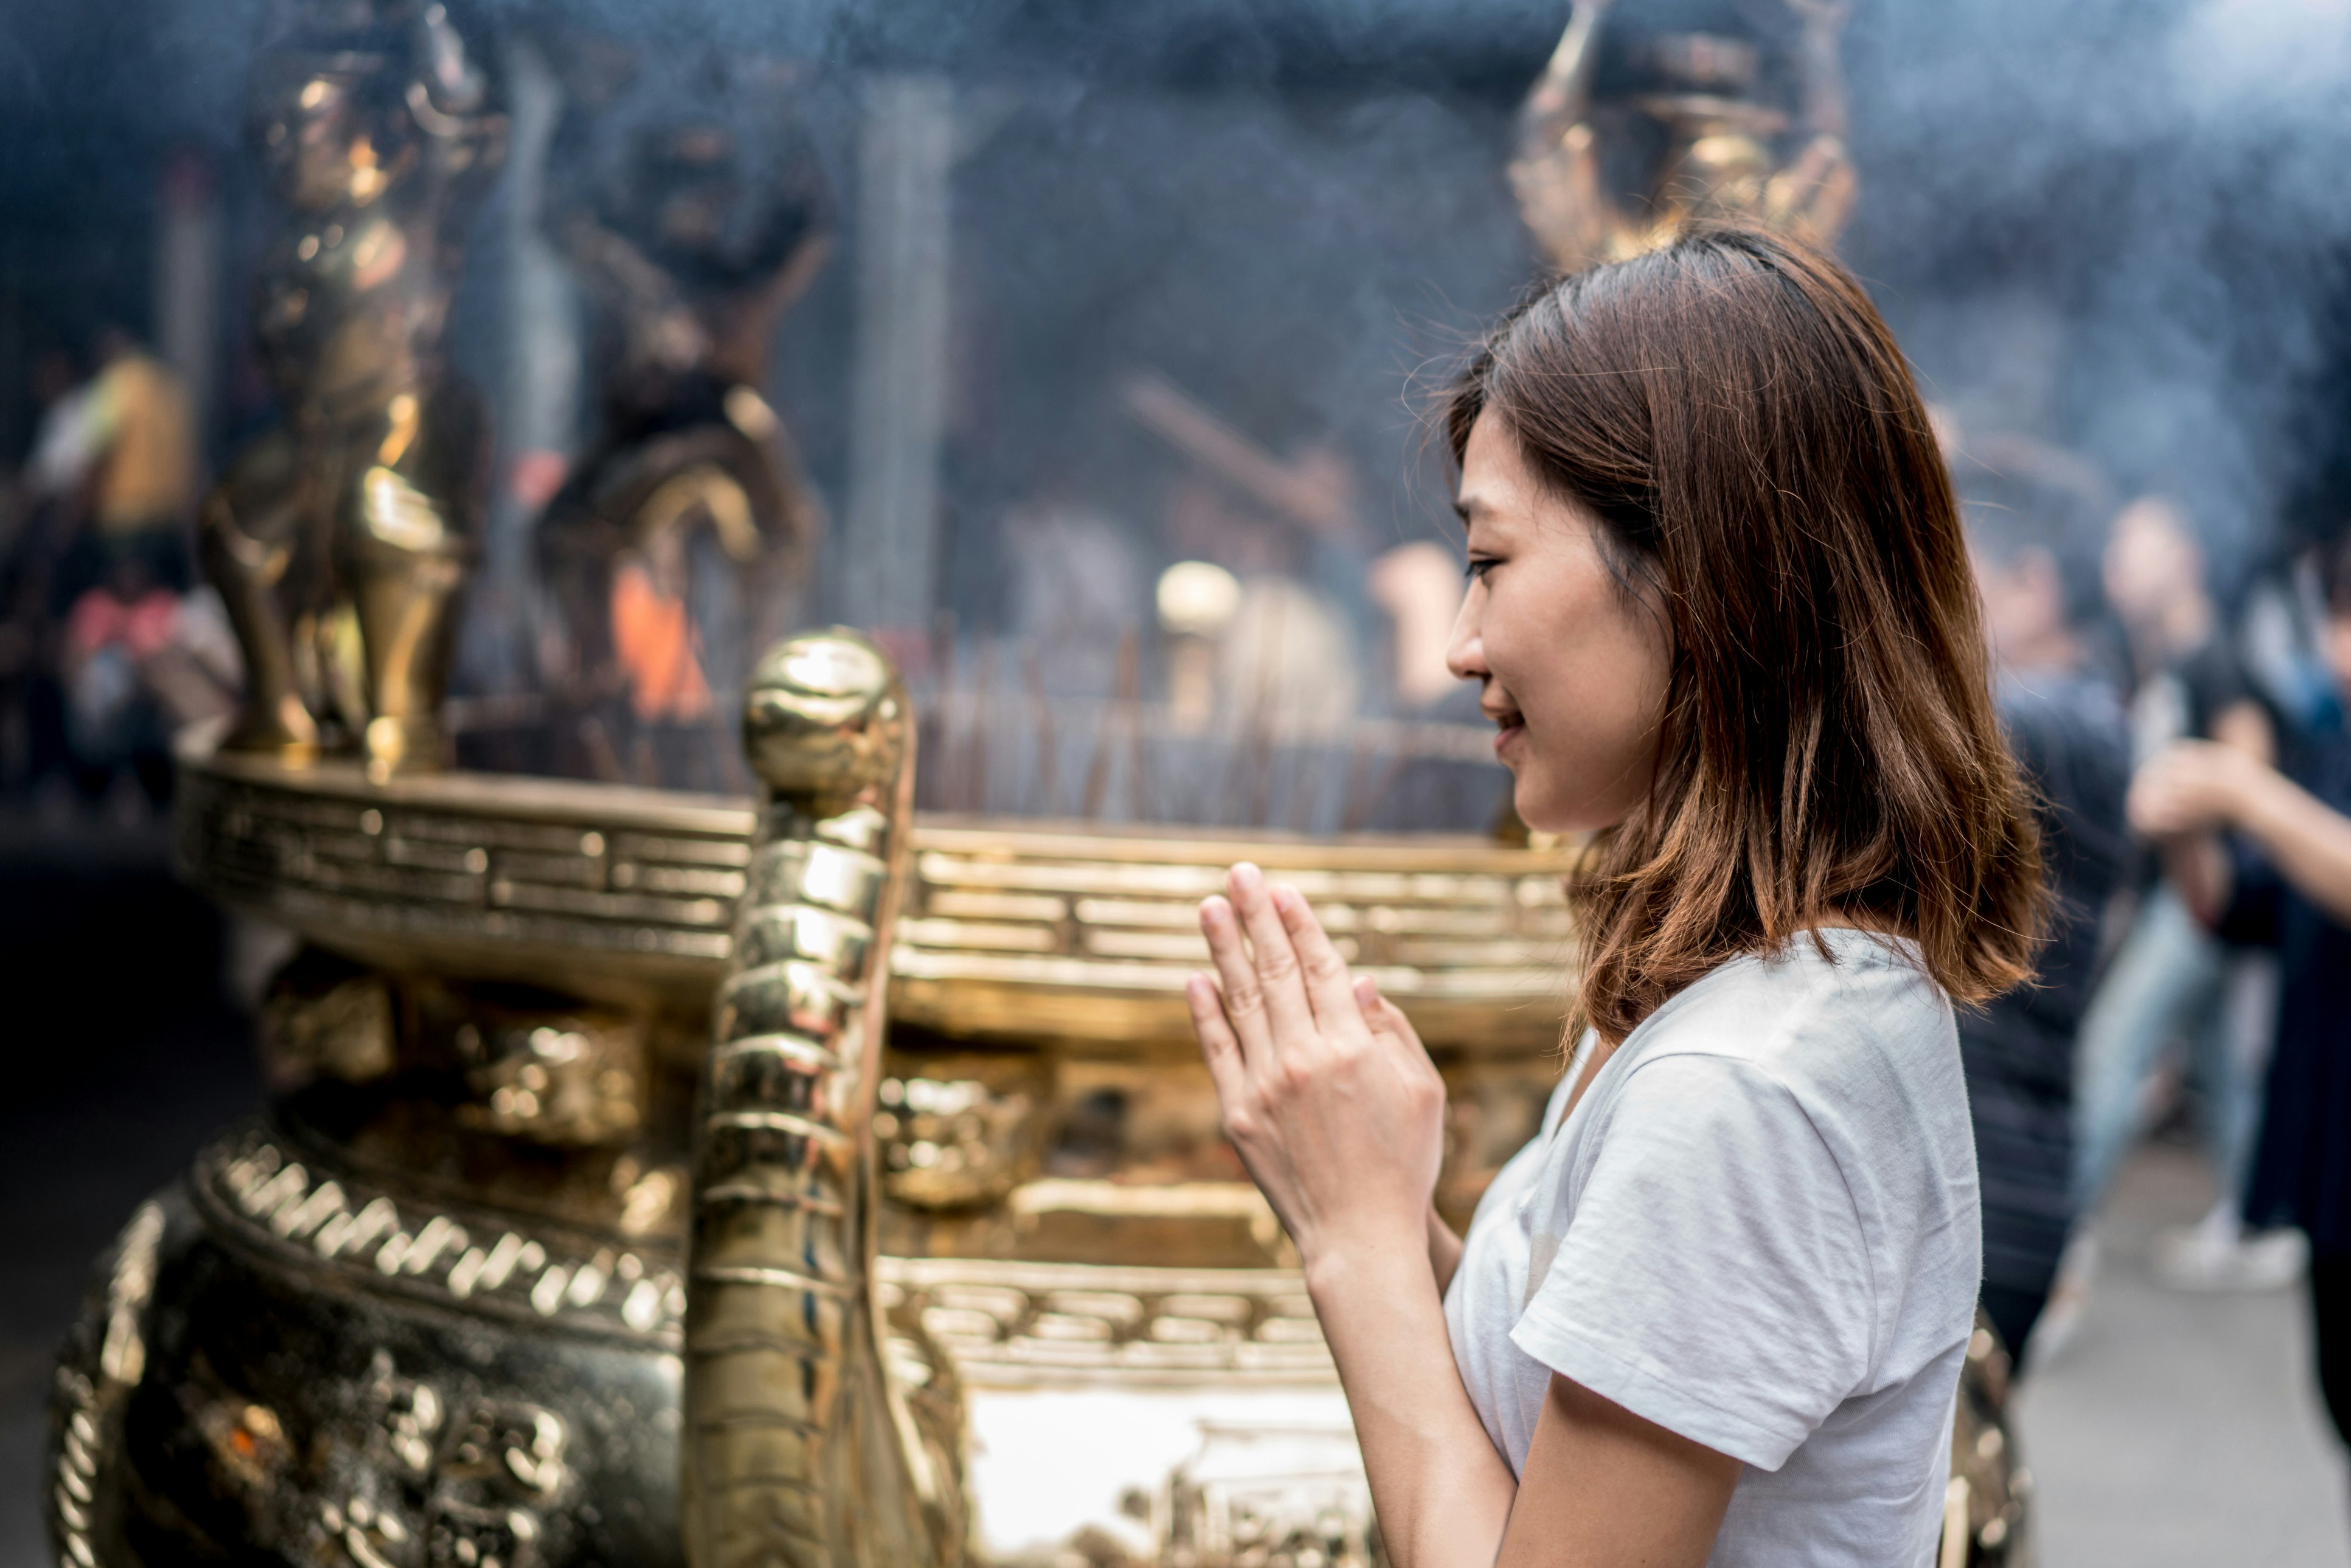 An Asian woman prays and bows her head in a temple